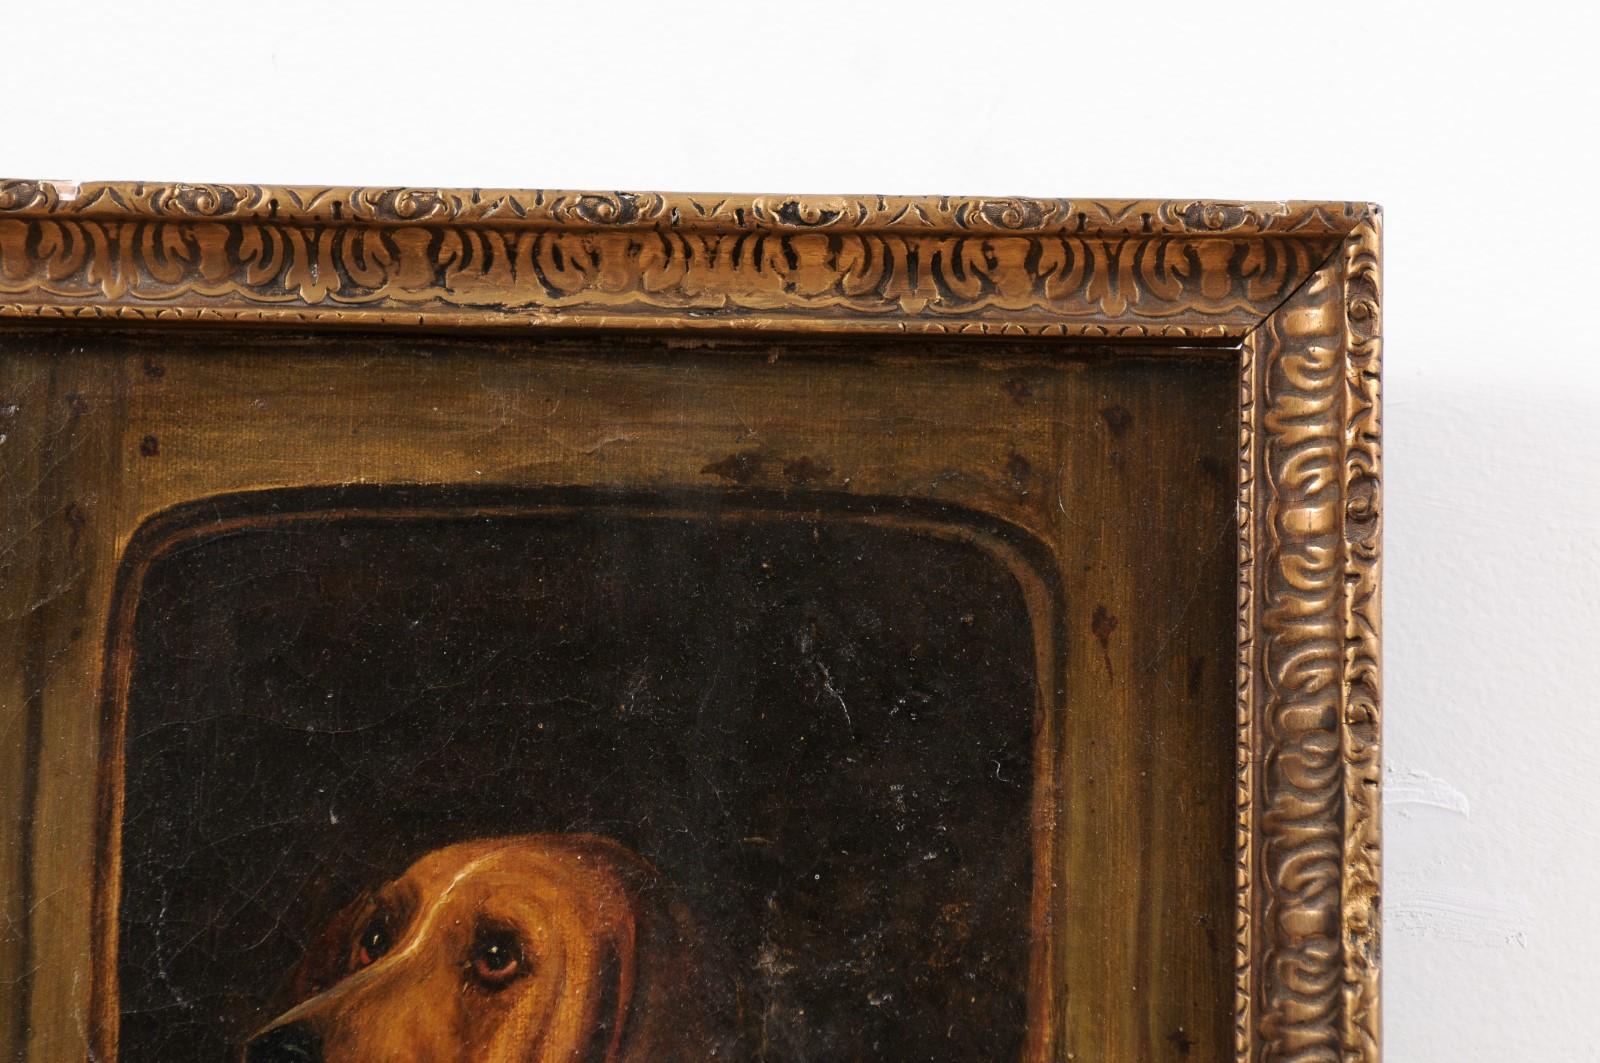 Hand-Painted English 19th Century Oil Dog Painting after Landseer's Dignity and Impudence